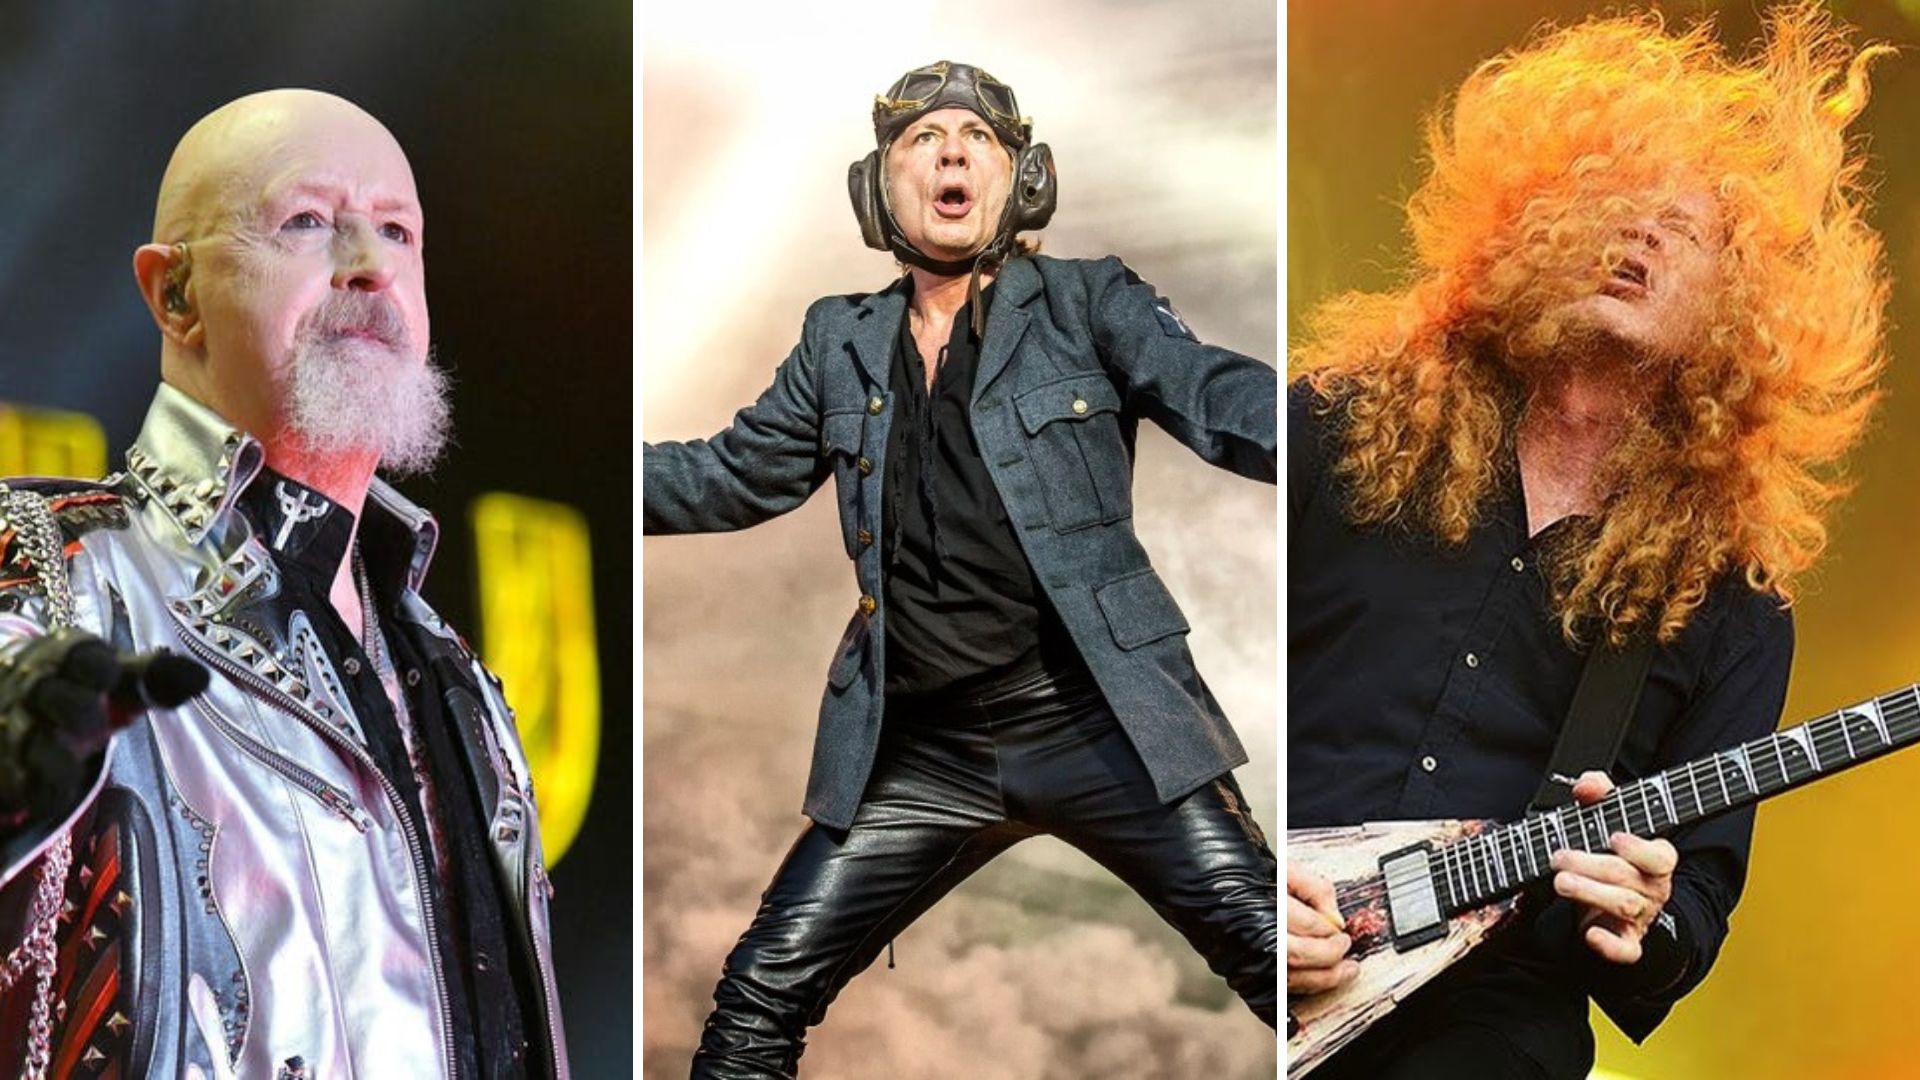 IRON MAIDEN Rumored To Tour South America In 2024 With JUDAS PRIEST And MEGADETH As Support